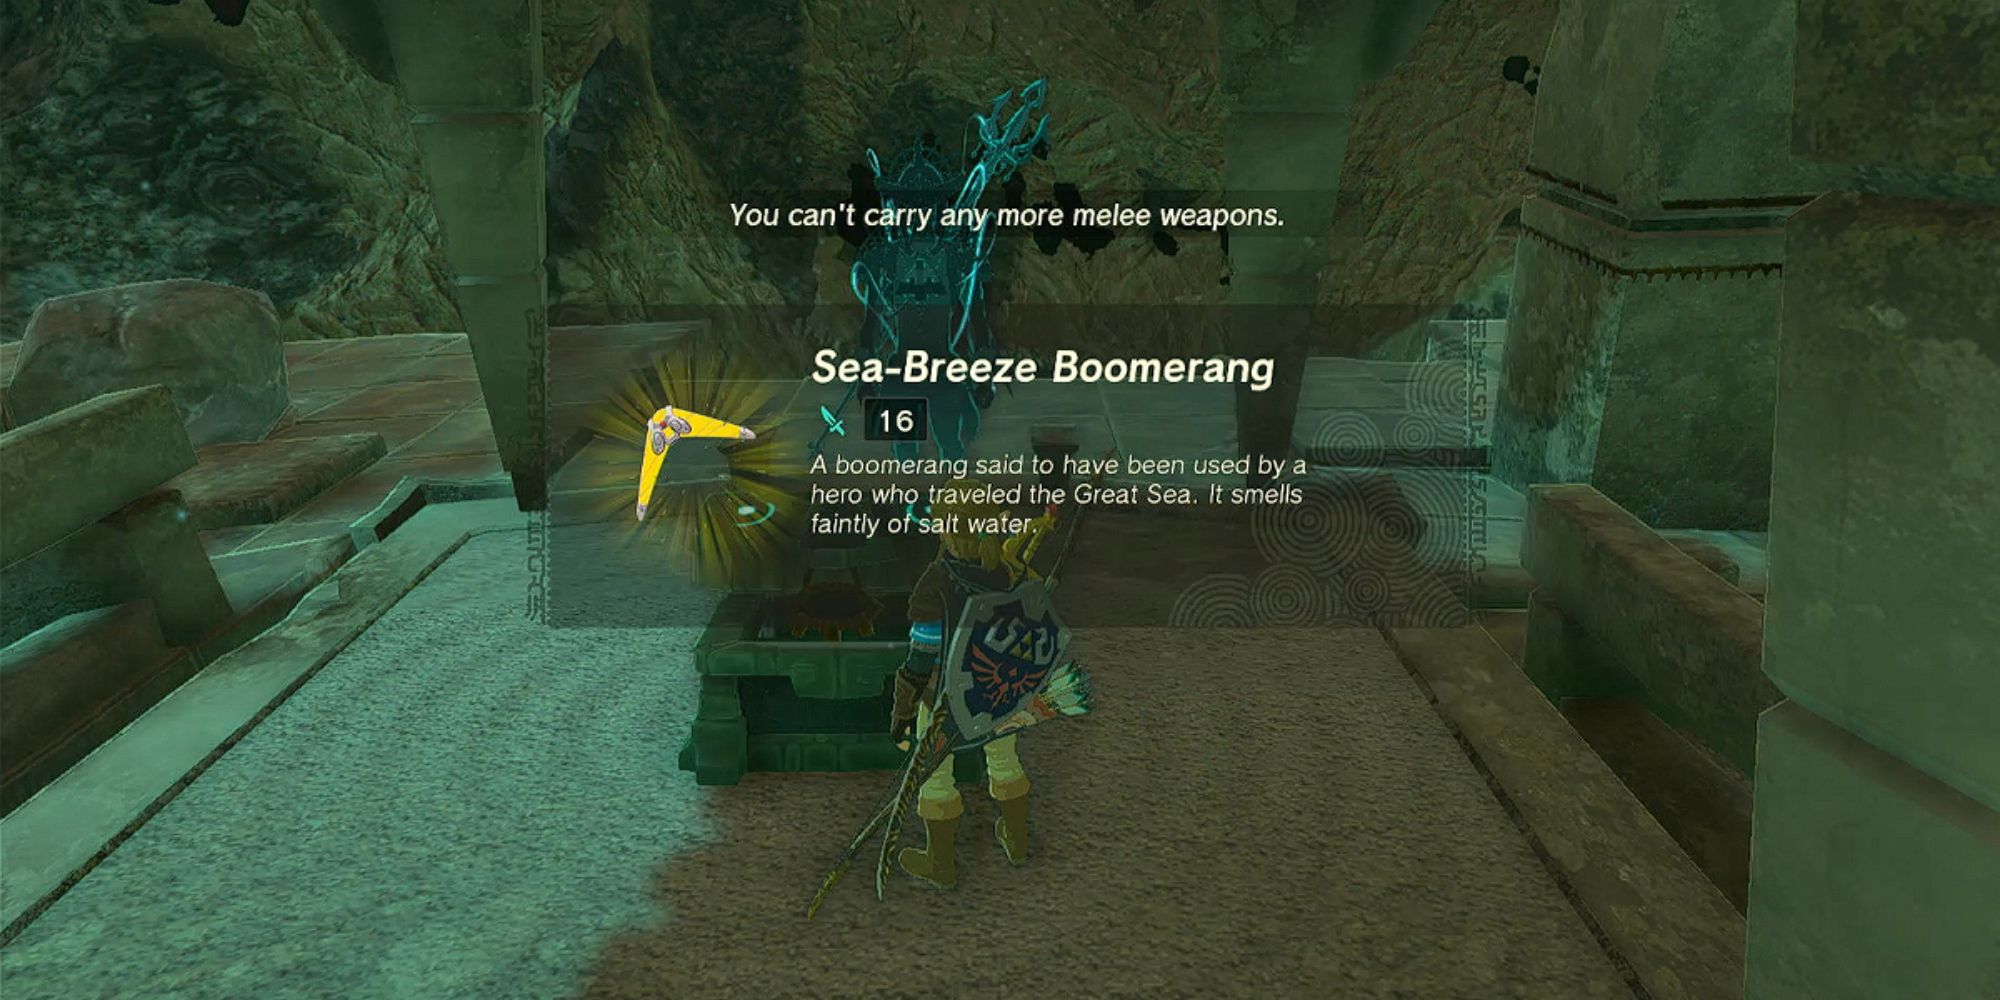 Link collecting a Sea-Breeze Boomerang from a treasure chest